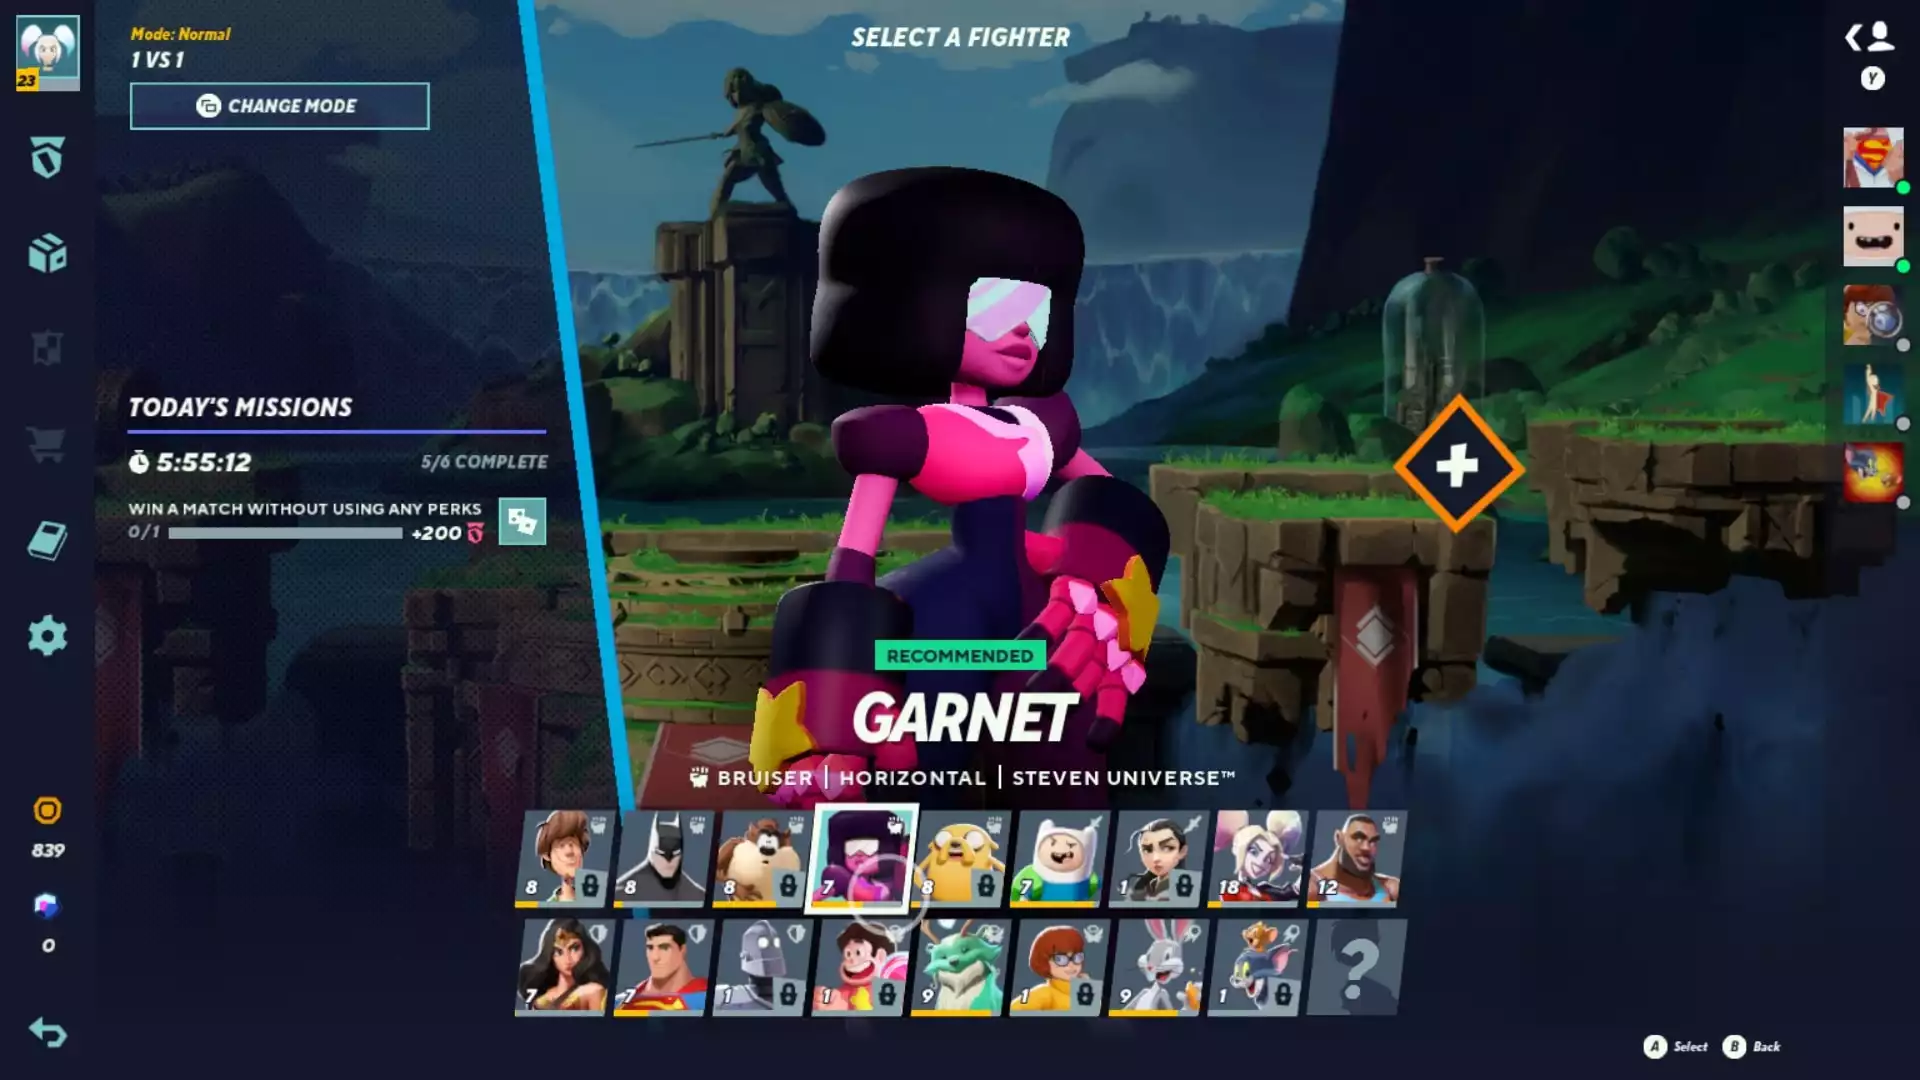 MultiVersus Garnet Guide: Combos, Perks, Specials, And More